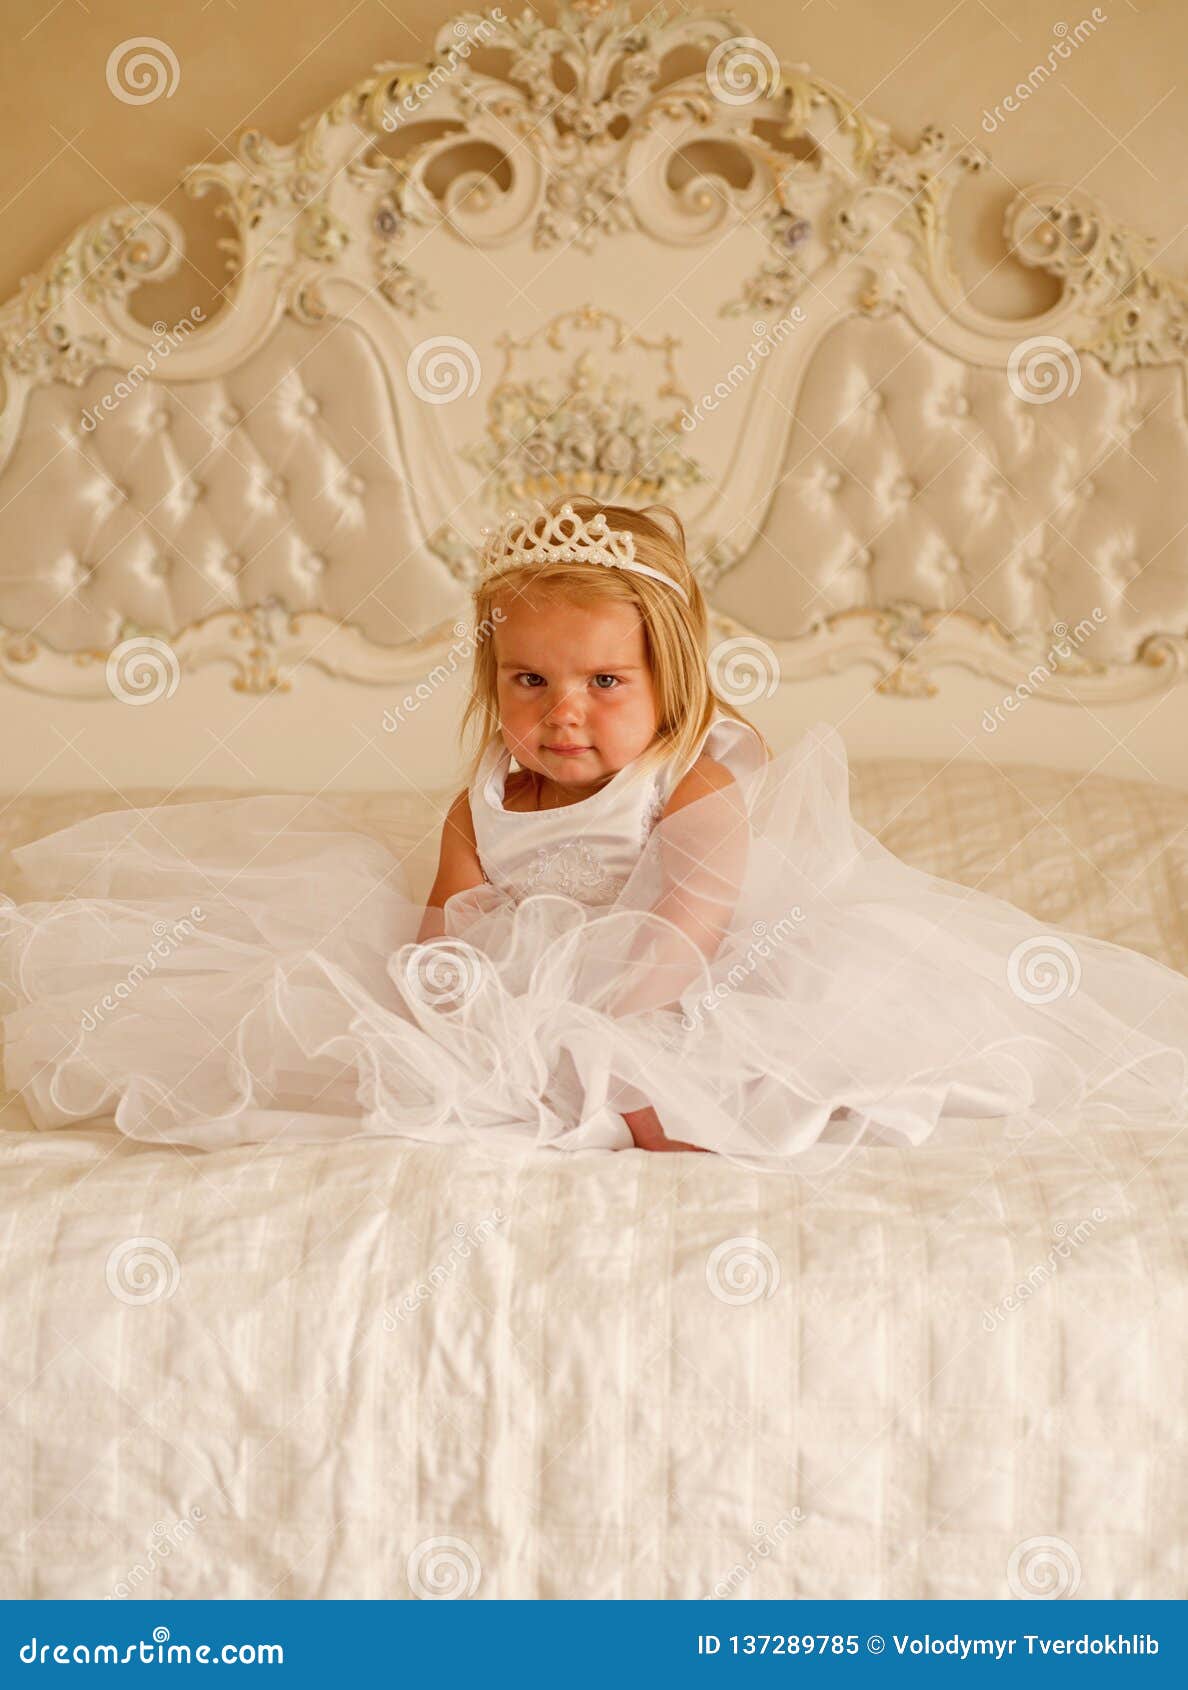 Little Princess. Little Girl Wear Tiara Crown and Hairstyle. Hair  Accessory. Little Child with Long Blond Hair Stock Image - Image of  hairdresser, little: 137289785